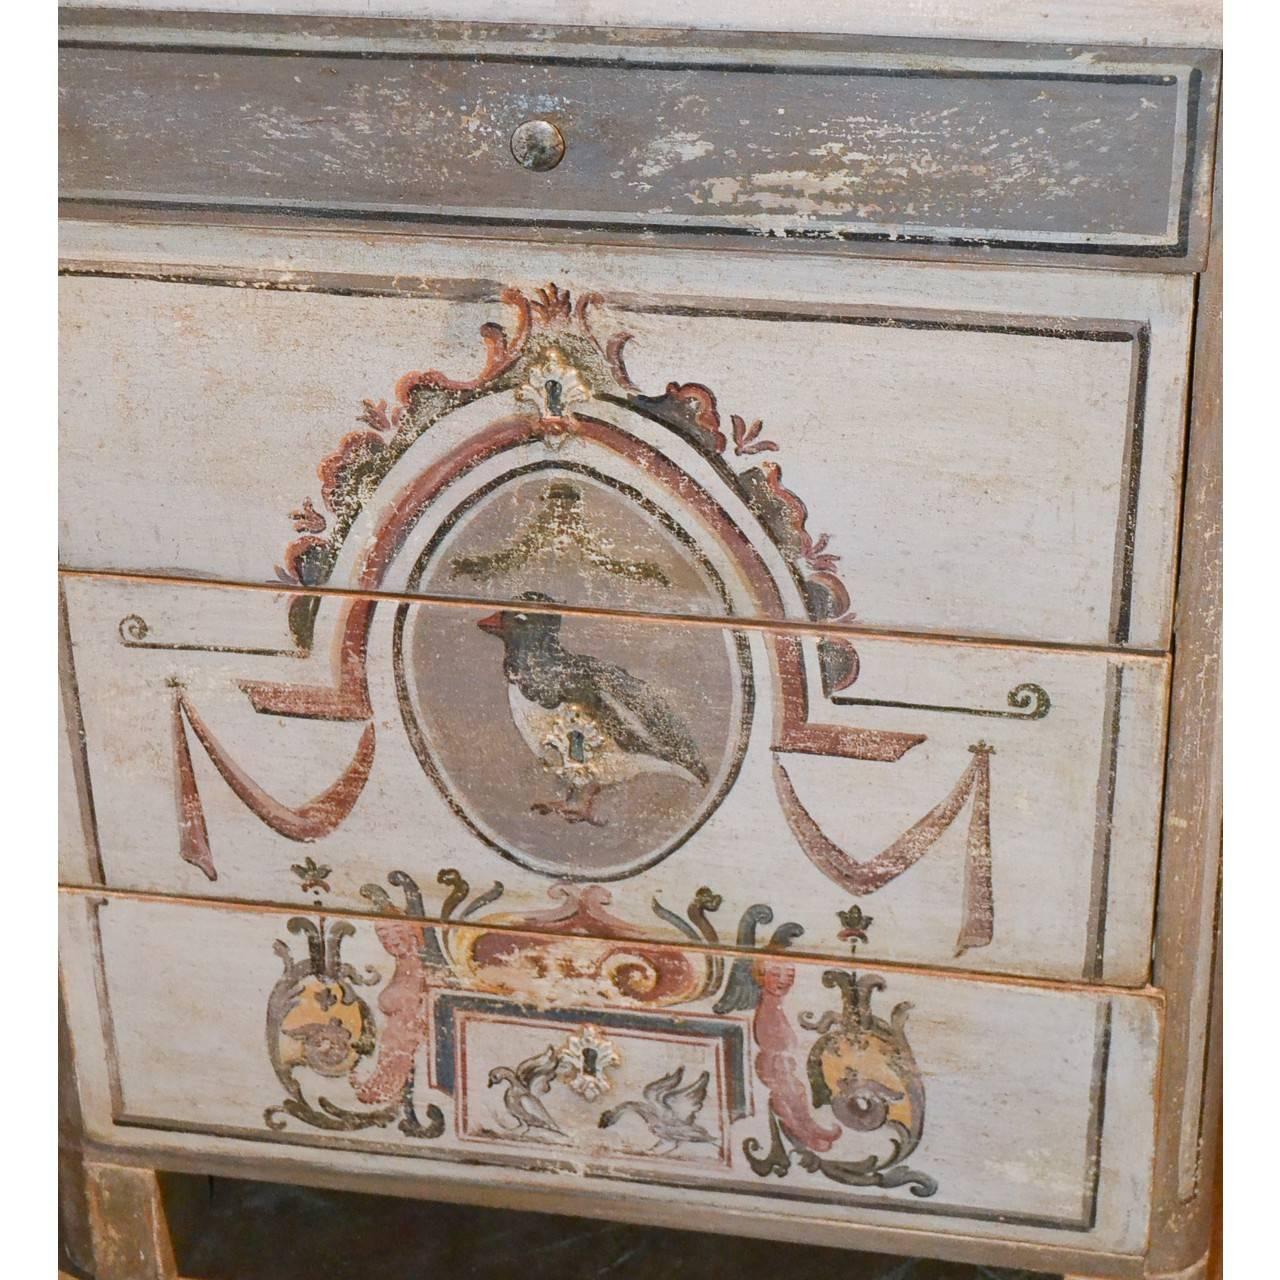 Sweetheart of a piece!

Lovely antique Continental four-drawer chest hand-painted in muted colors with stylized leaf scrolls, birds, and caryatid figures,

circa 1900.